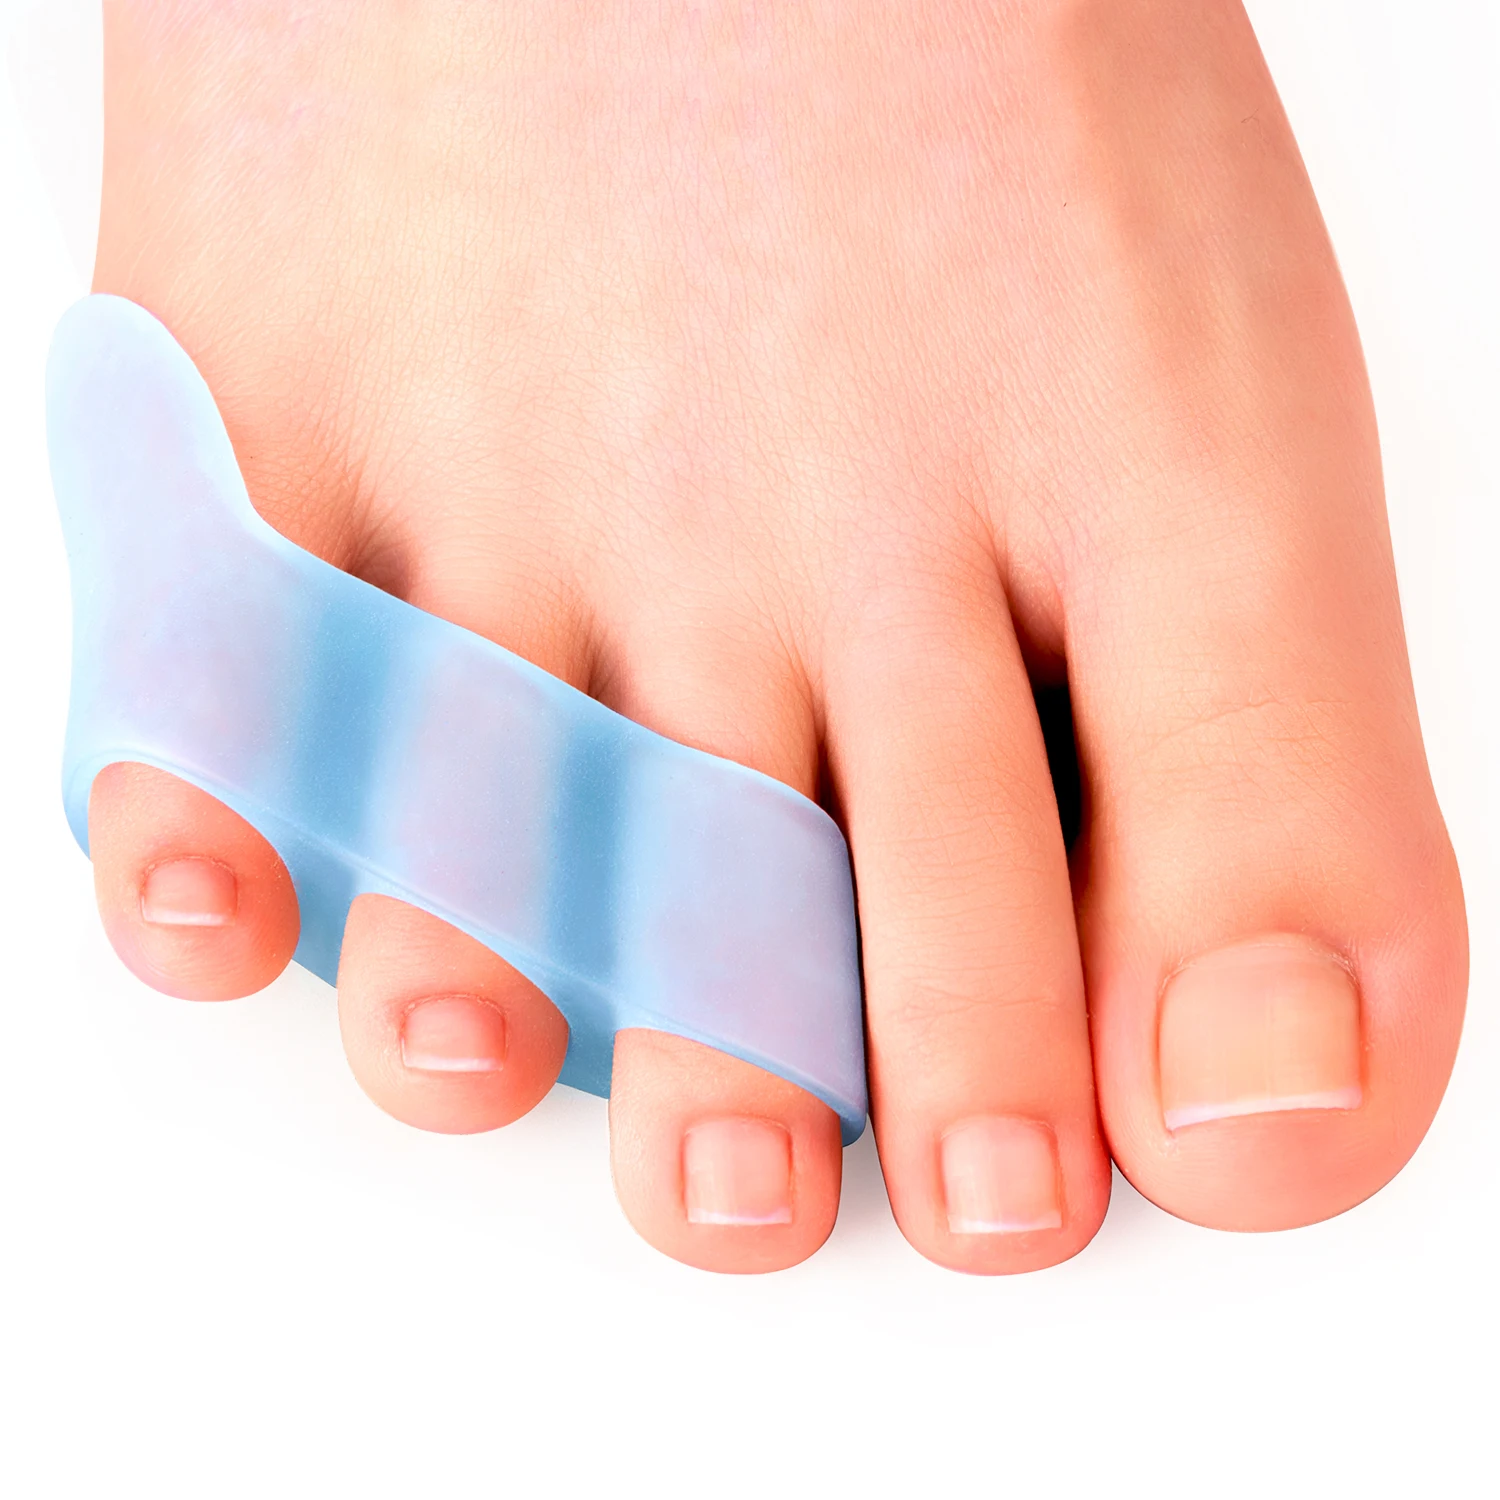 

2pcs Three-hole Little Toe Separator Overlapping Toes Bunion Blister Pain Relief Toe Straightener Protector Foot Care Tool C1794